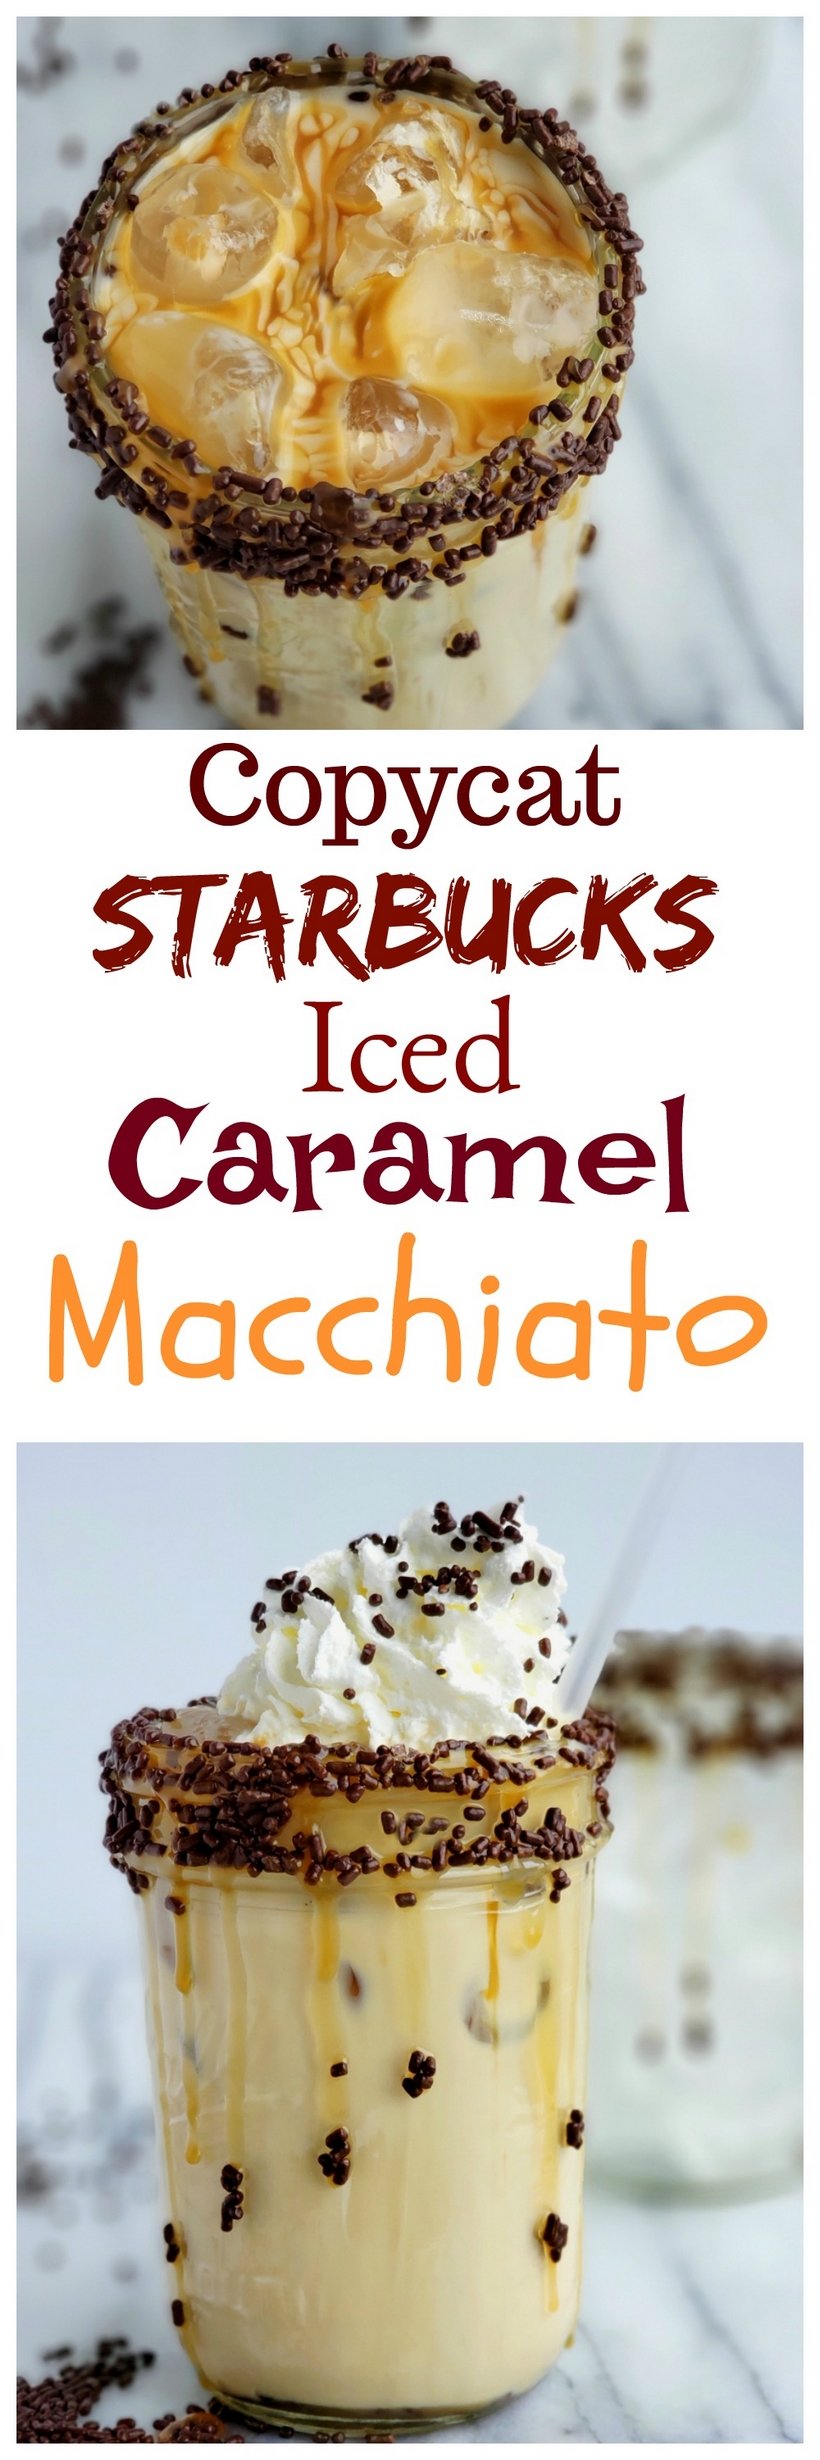 Copycat Starbucks Iced Caramel Macchiato,How To Bleach Clothes At Home